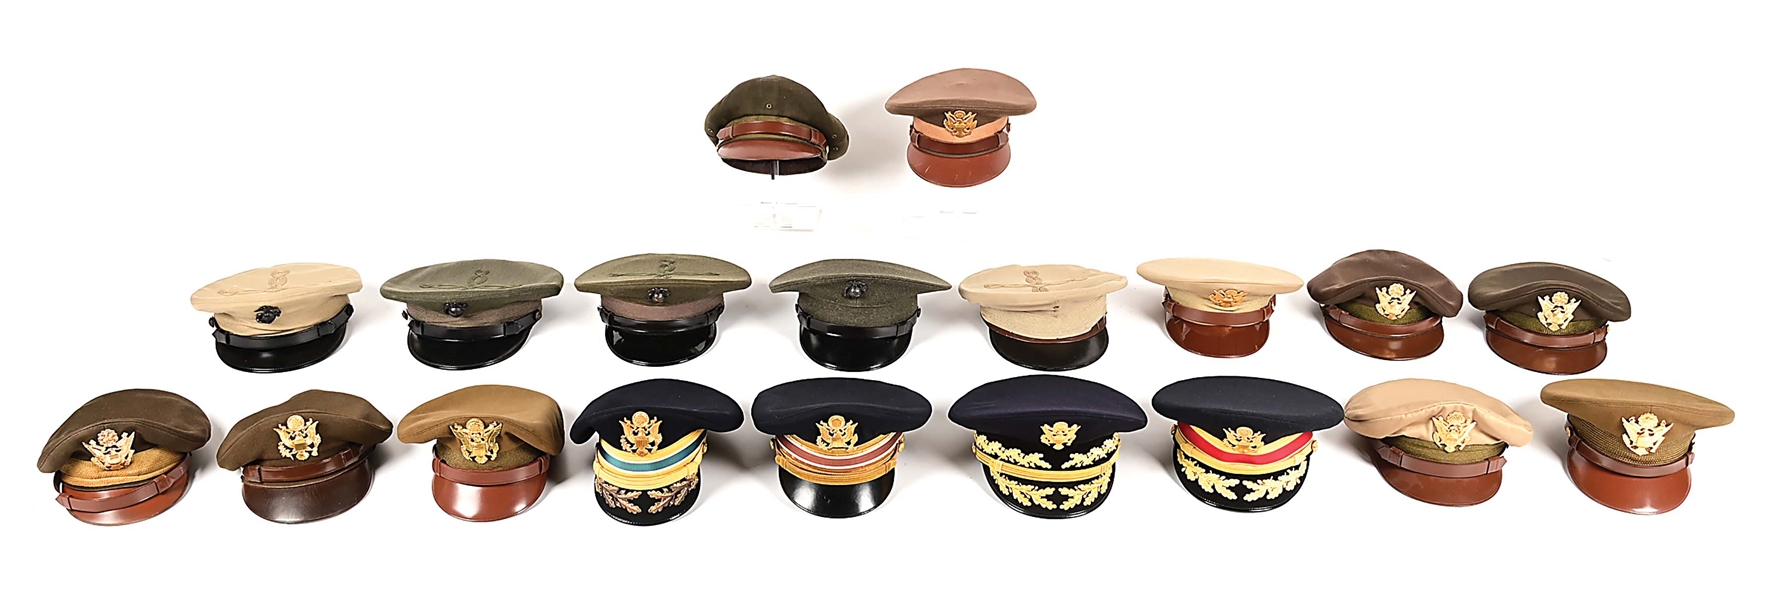 LOT OF 19: US WWII ARMY AND MARINE CORPS OFFICERS VISOR AND CRUSHER CAPS. 